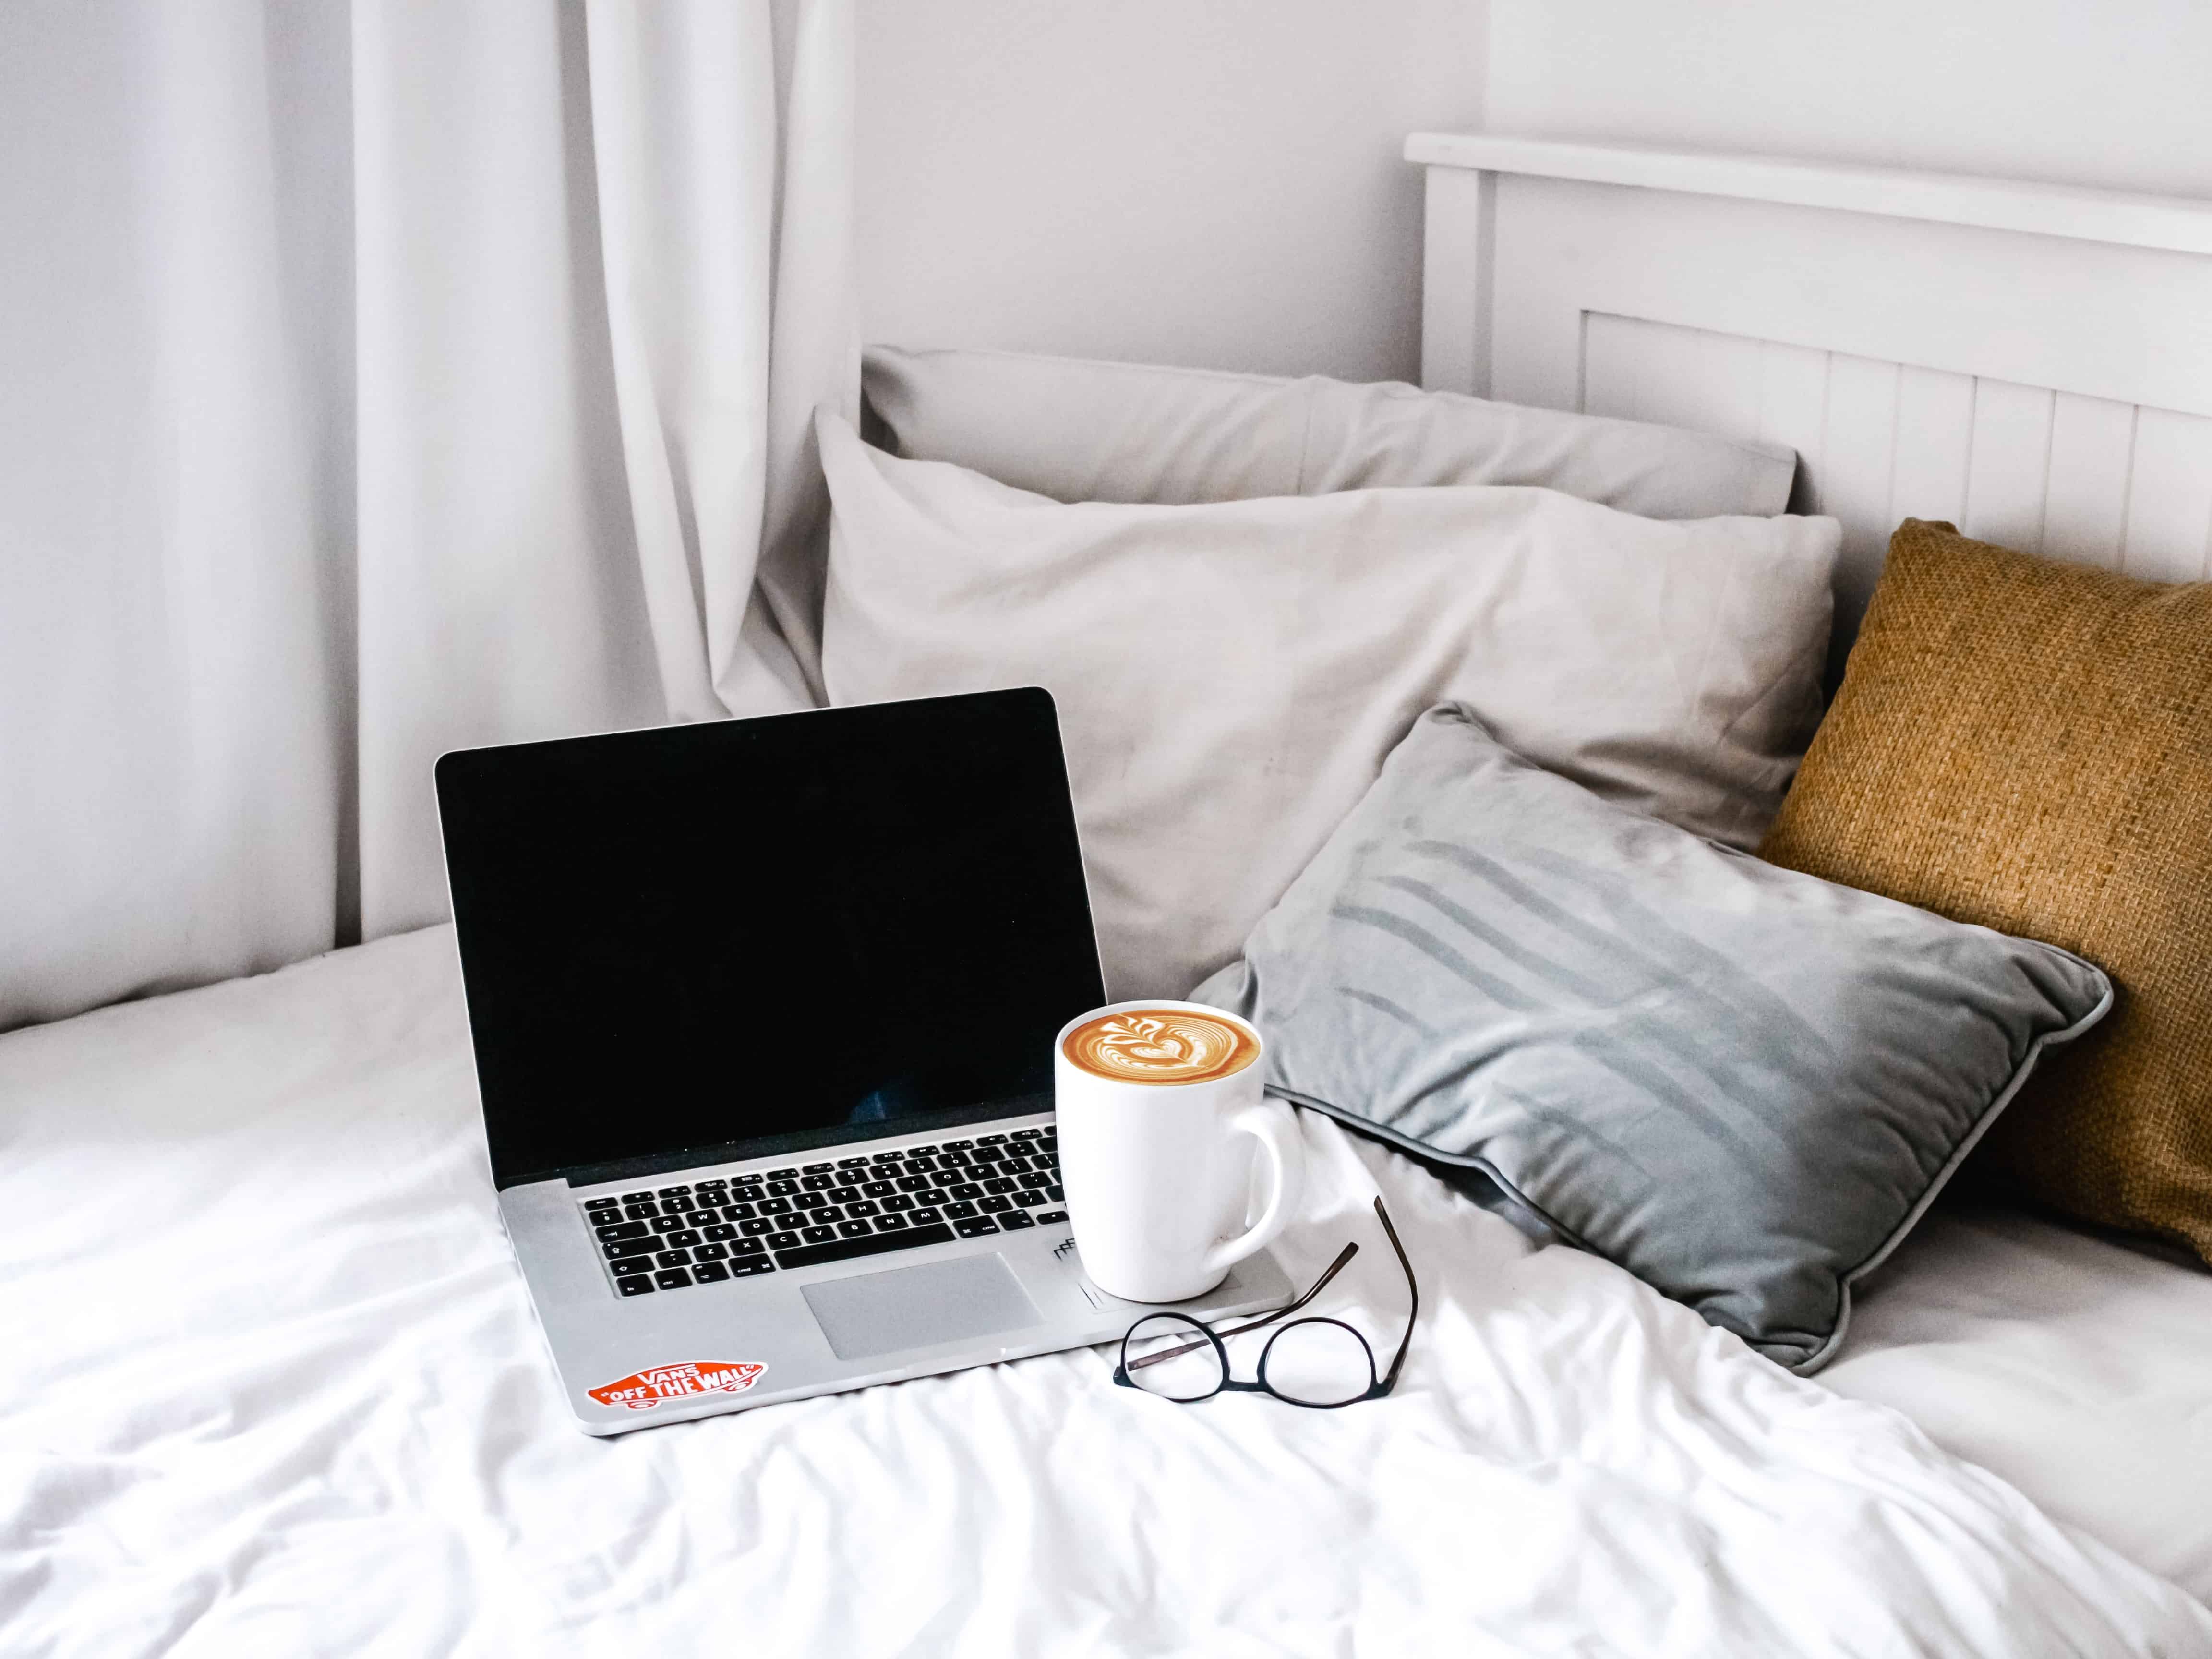 Things You Need to Know Before Becoming a Full-Time Blogger